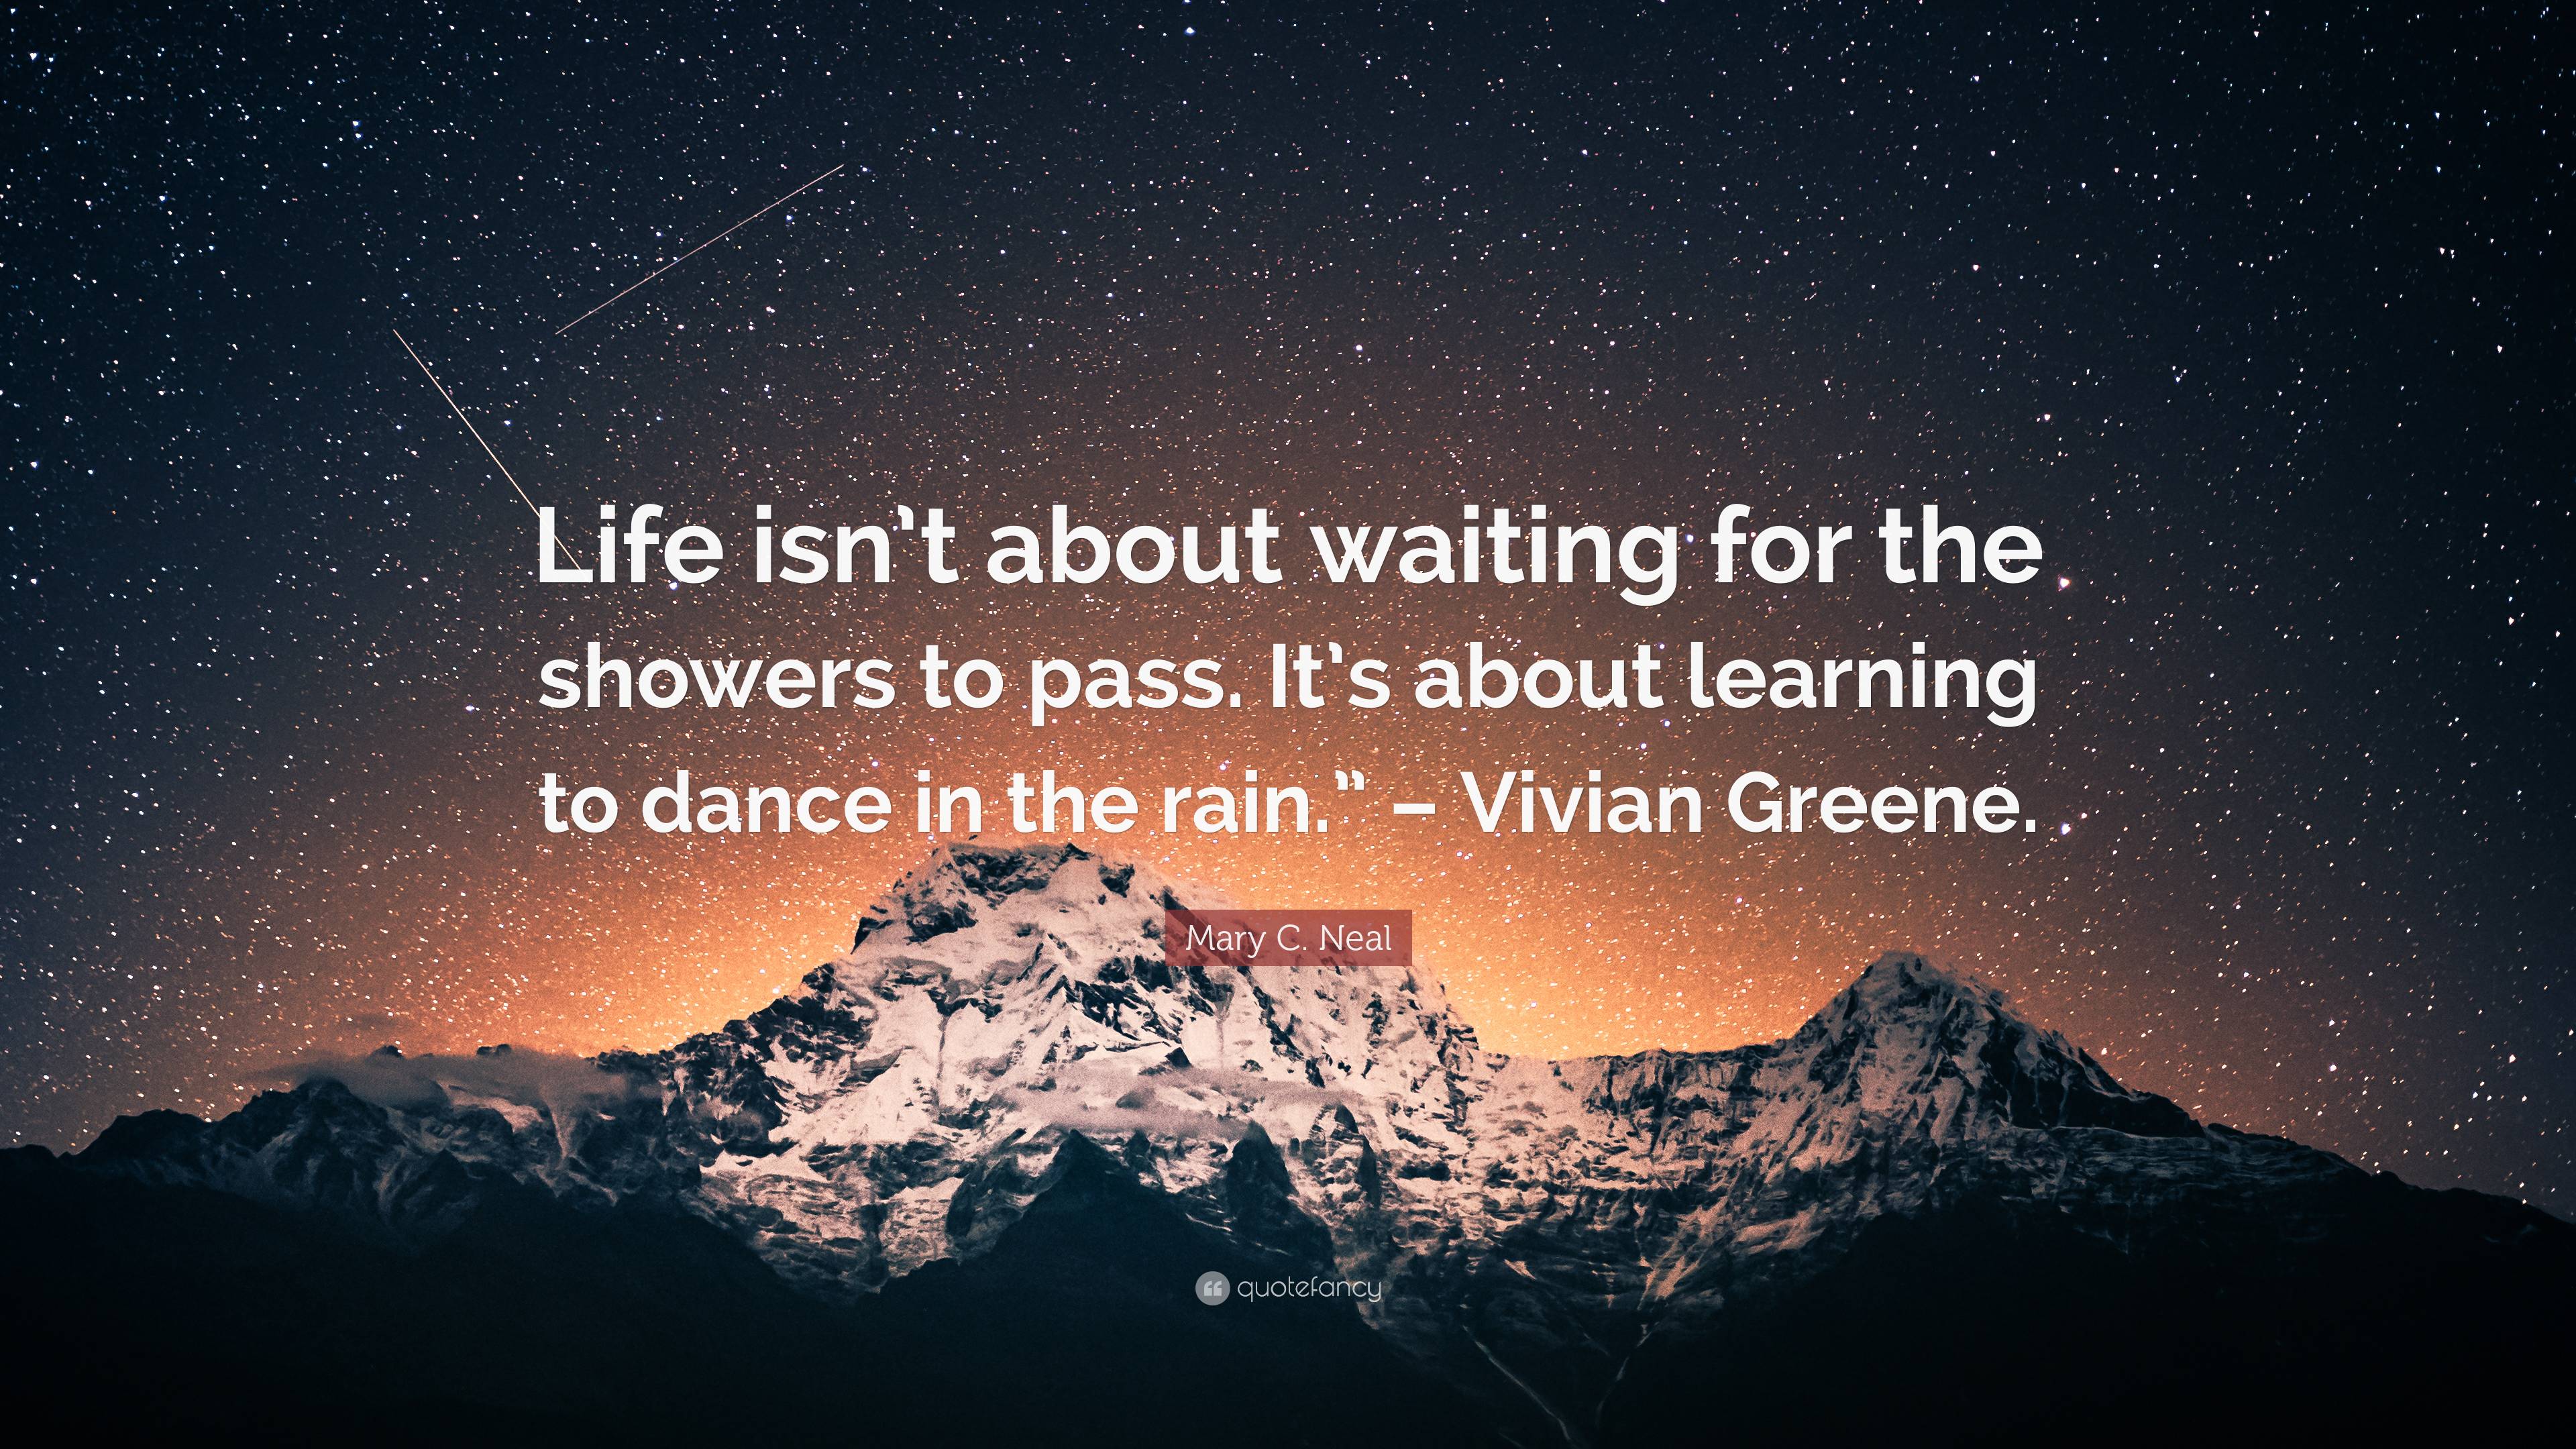 Mary C. Neal Quote: “Life isn’t about waiting for the showers to pass ...